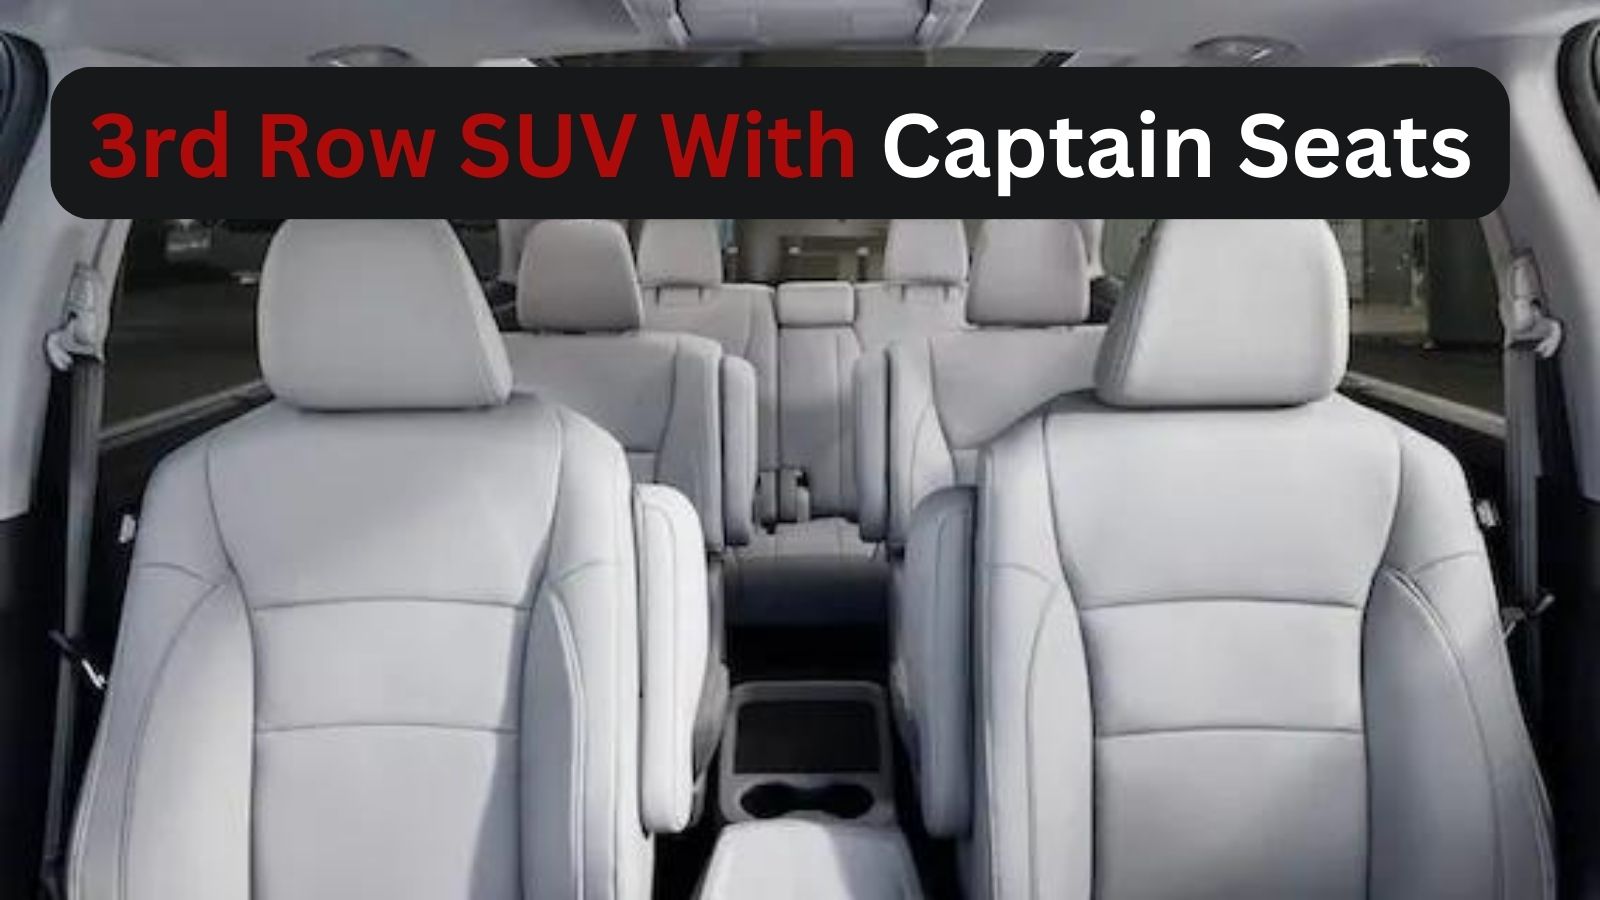 3rd row suv with captain seats